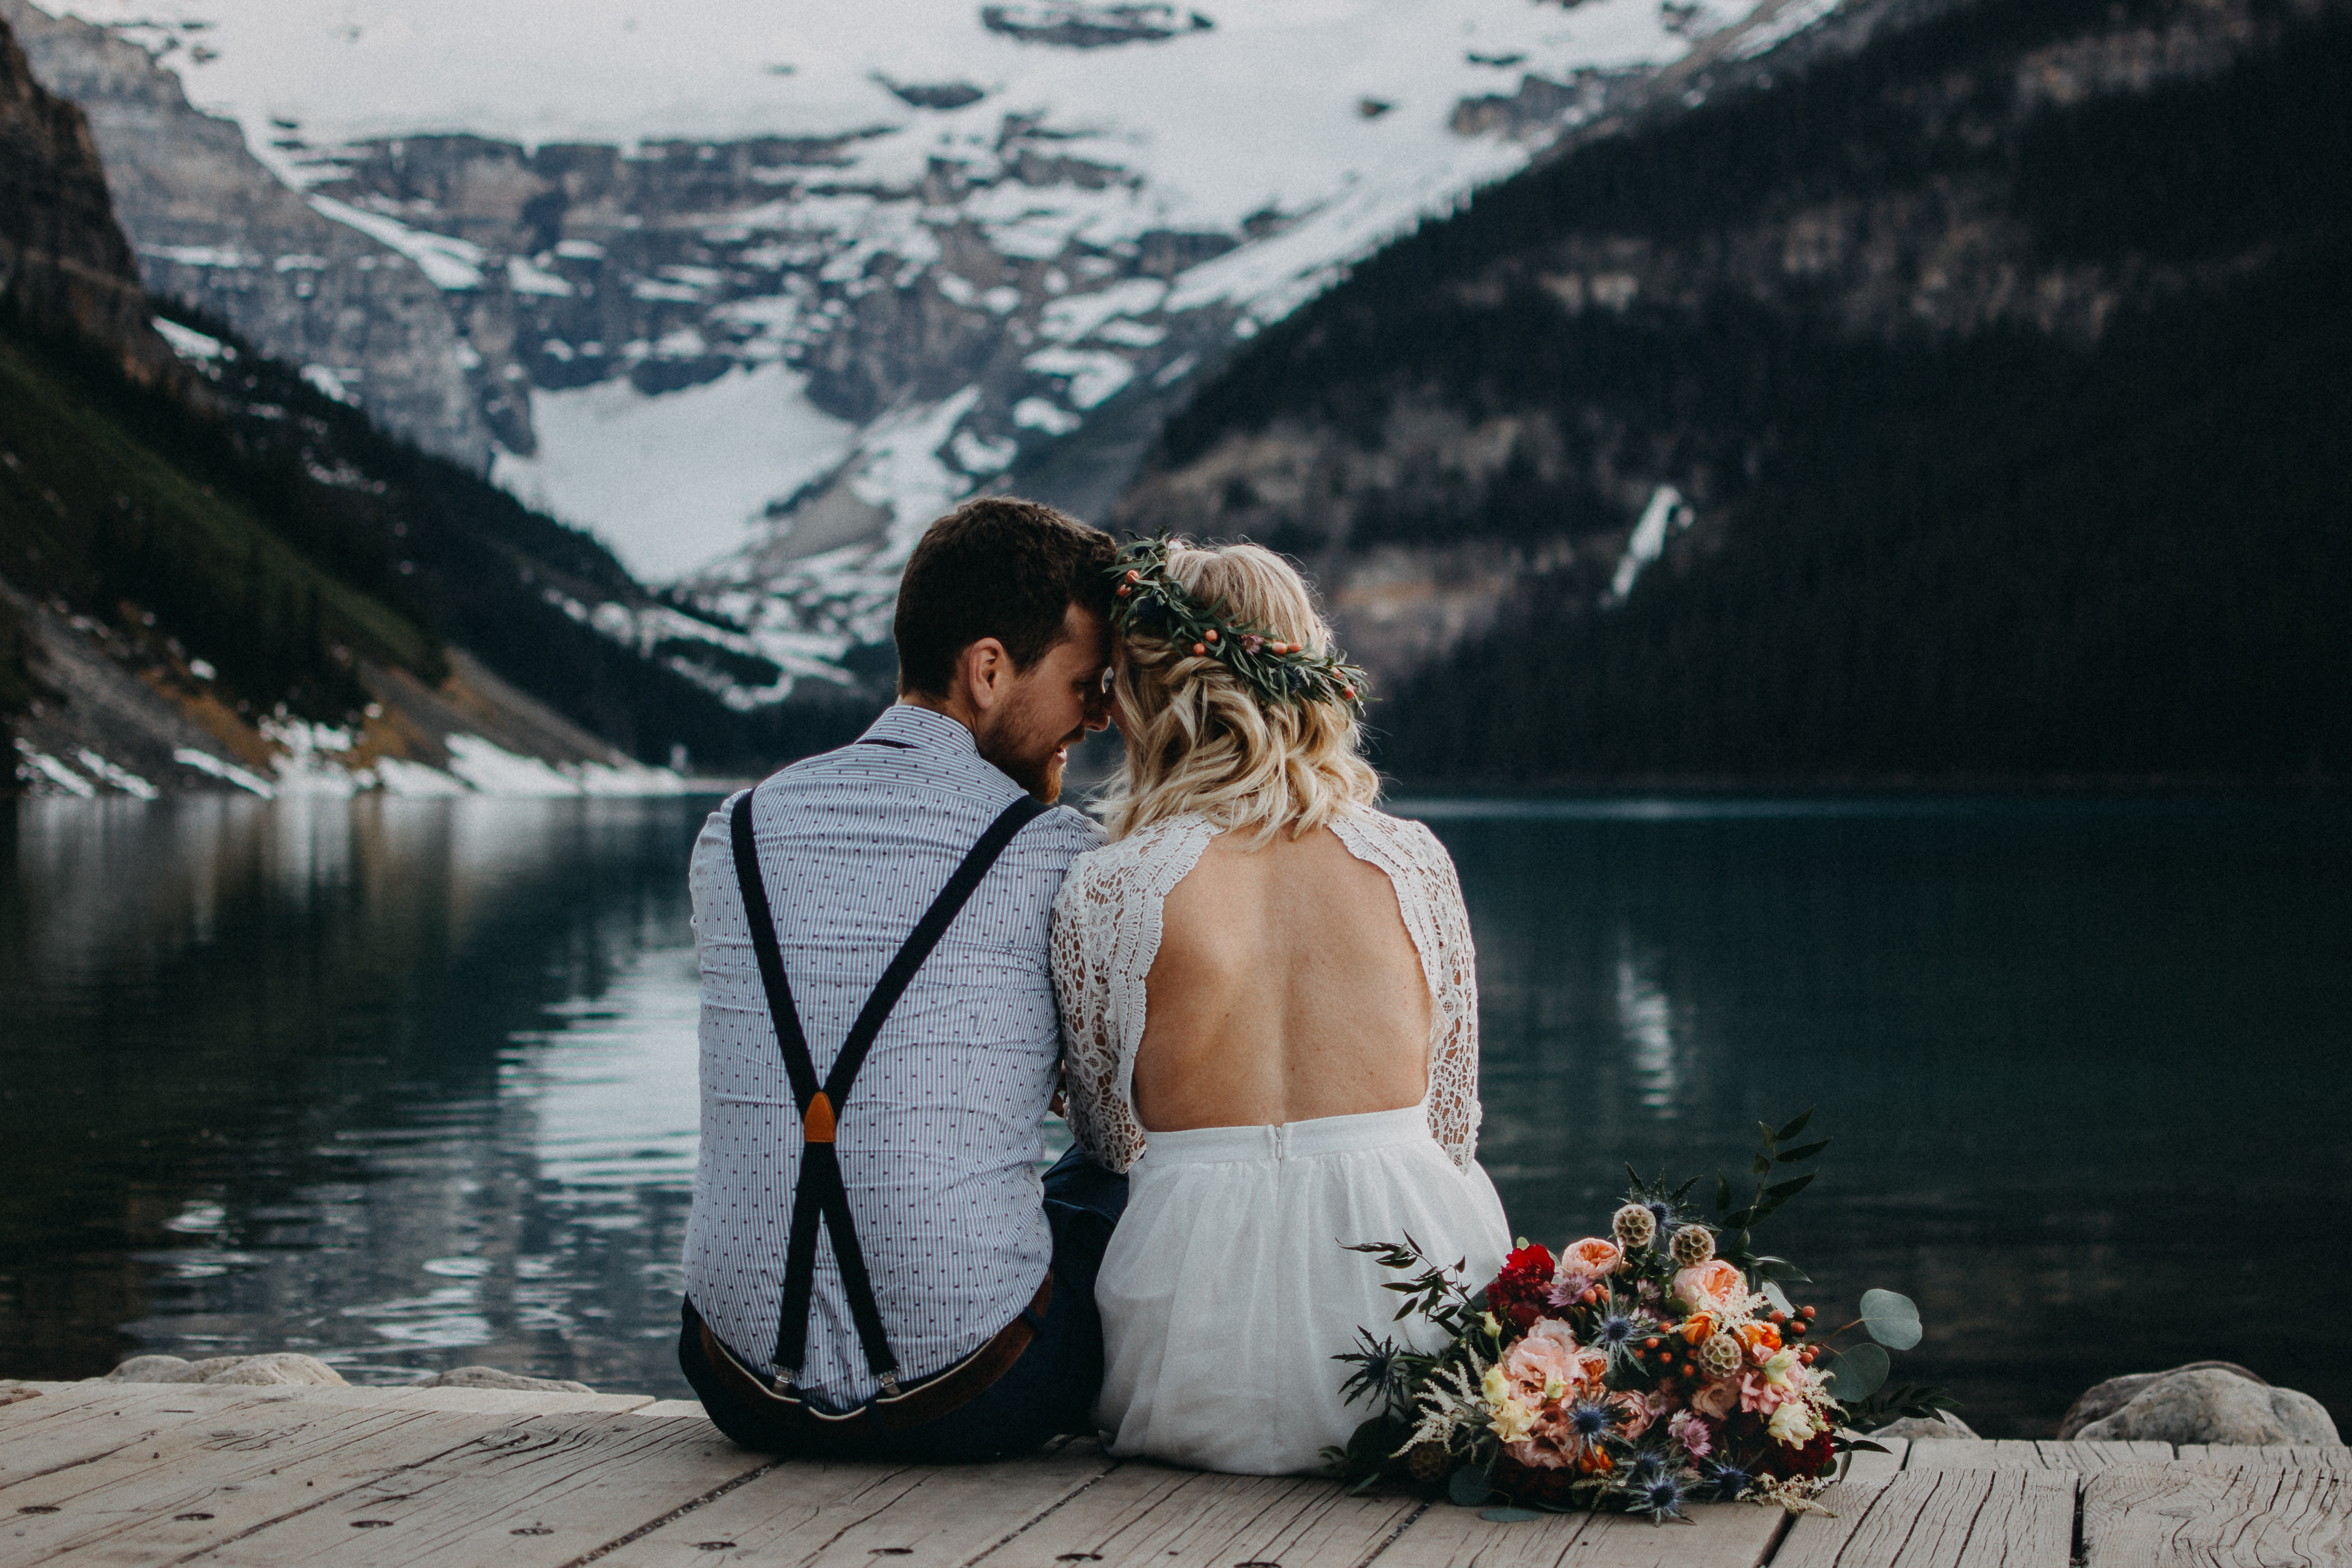 The bride and groom sitting on the dock at Lake Louise, Alberta, with their backs to the camera